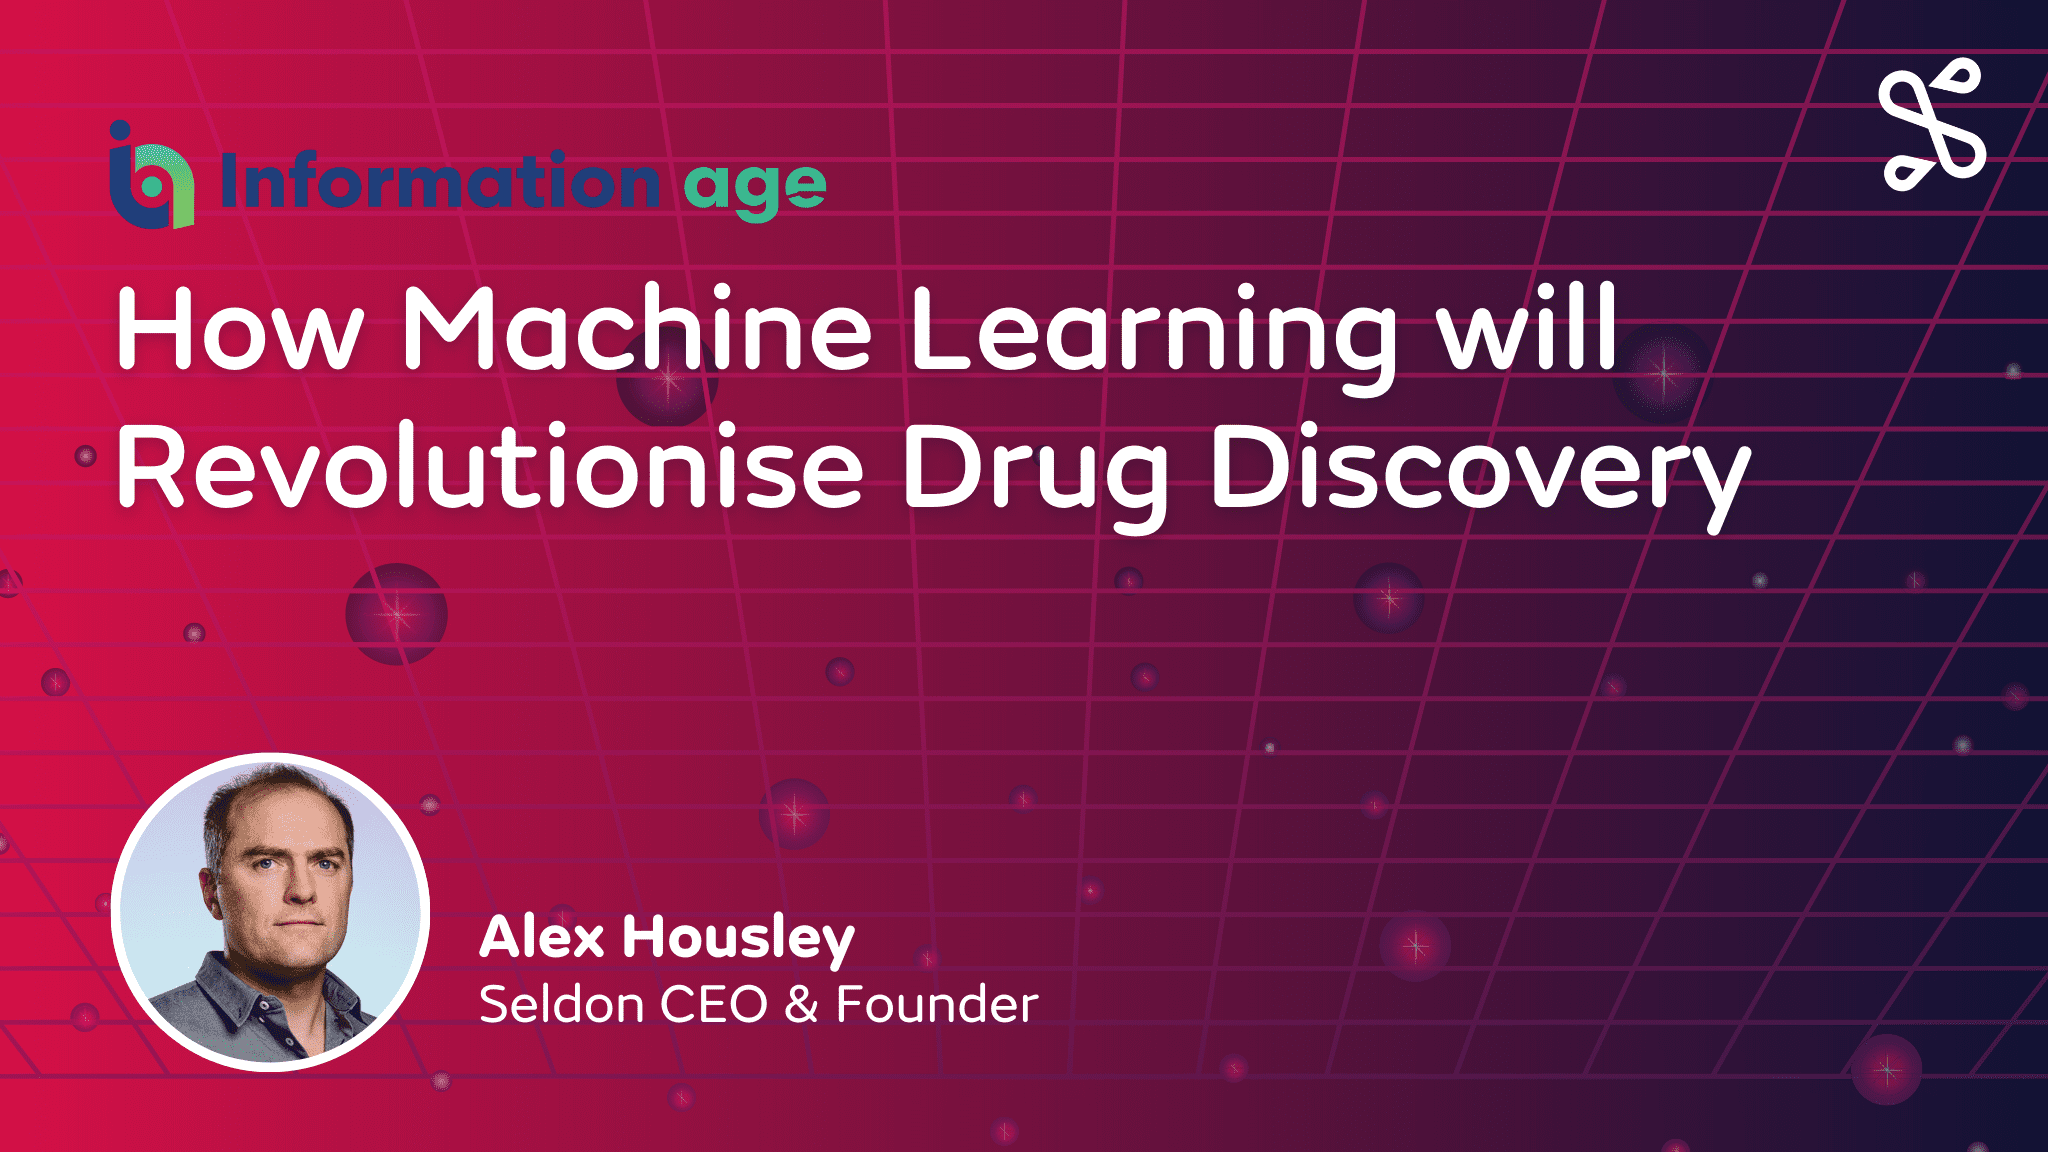 Information Age: How Machine Learning Will Revolutionise Drug Discovery